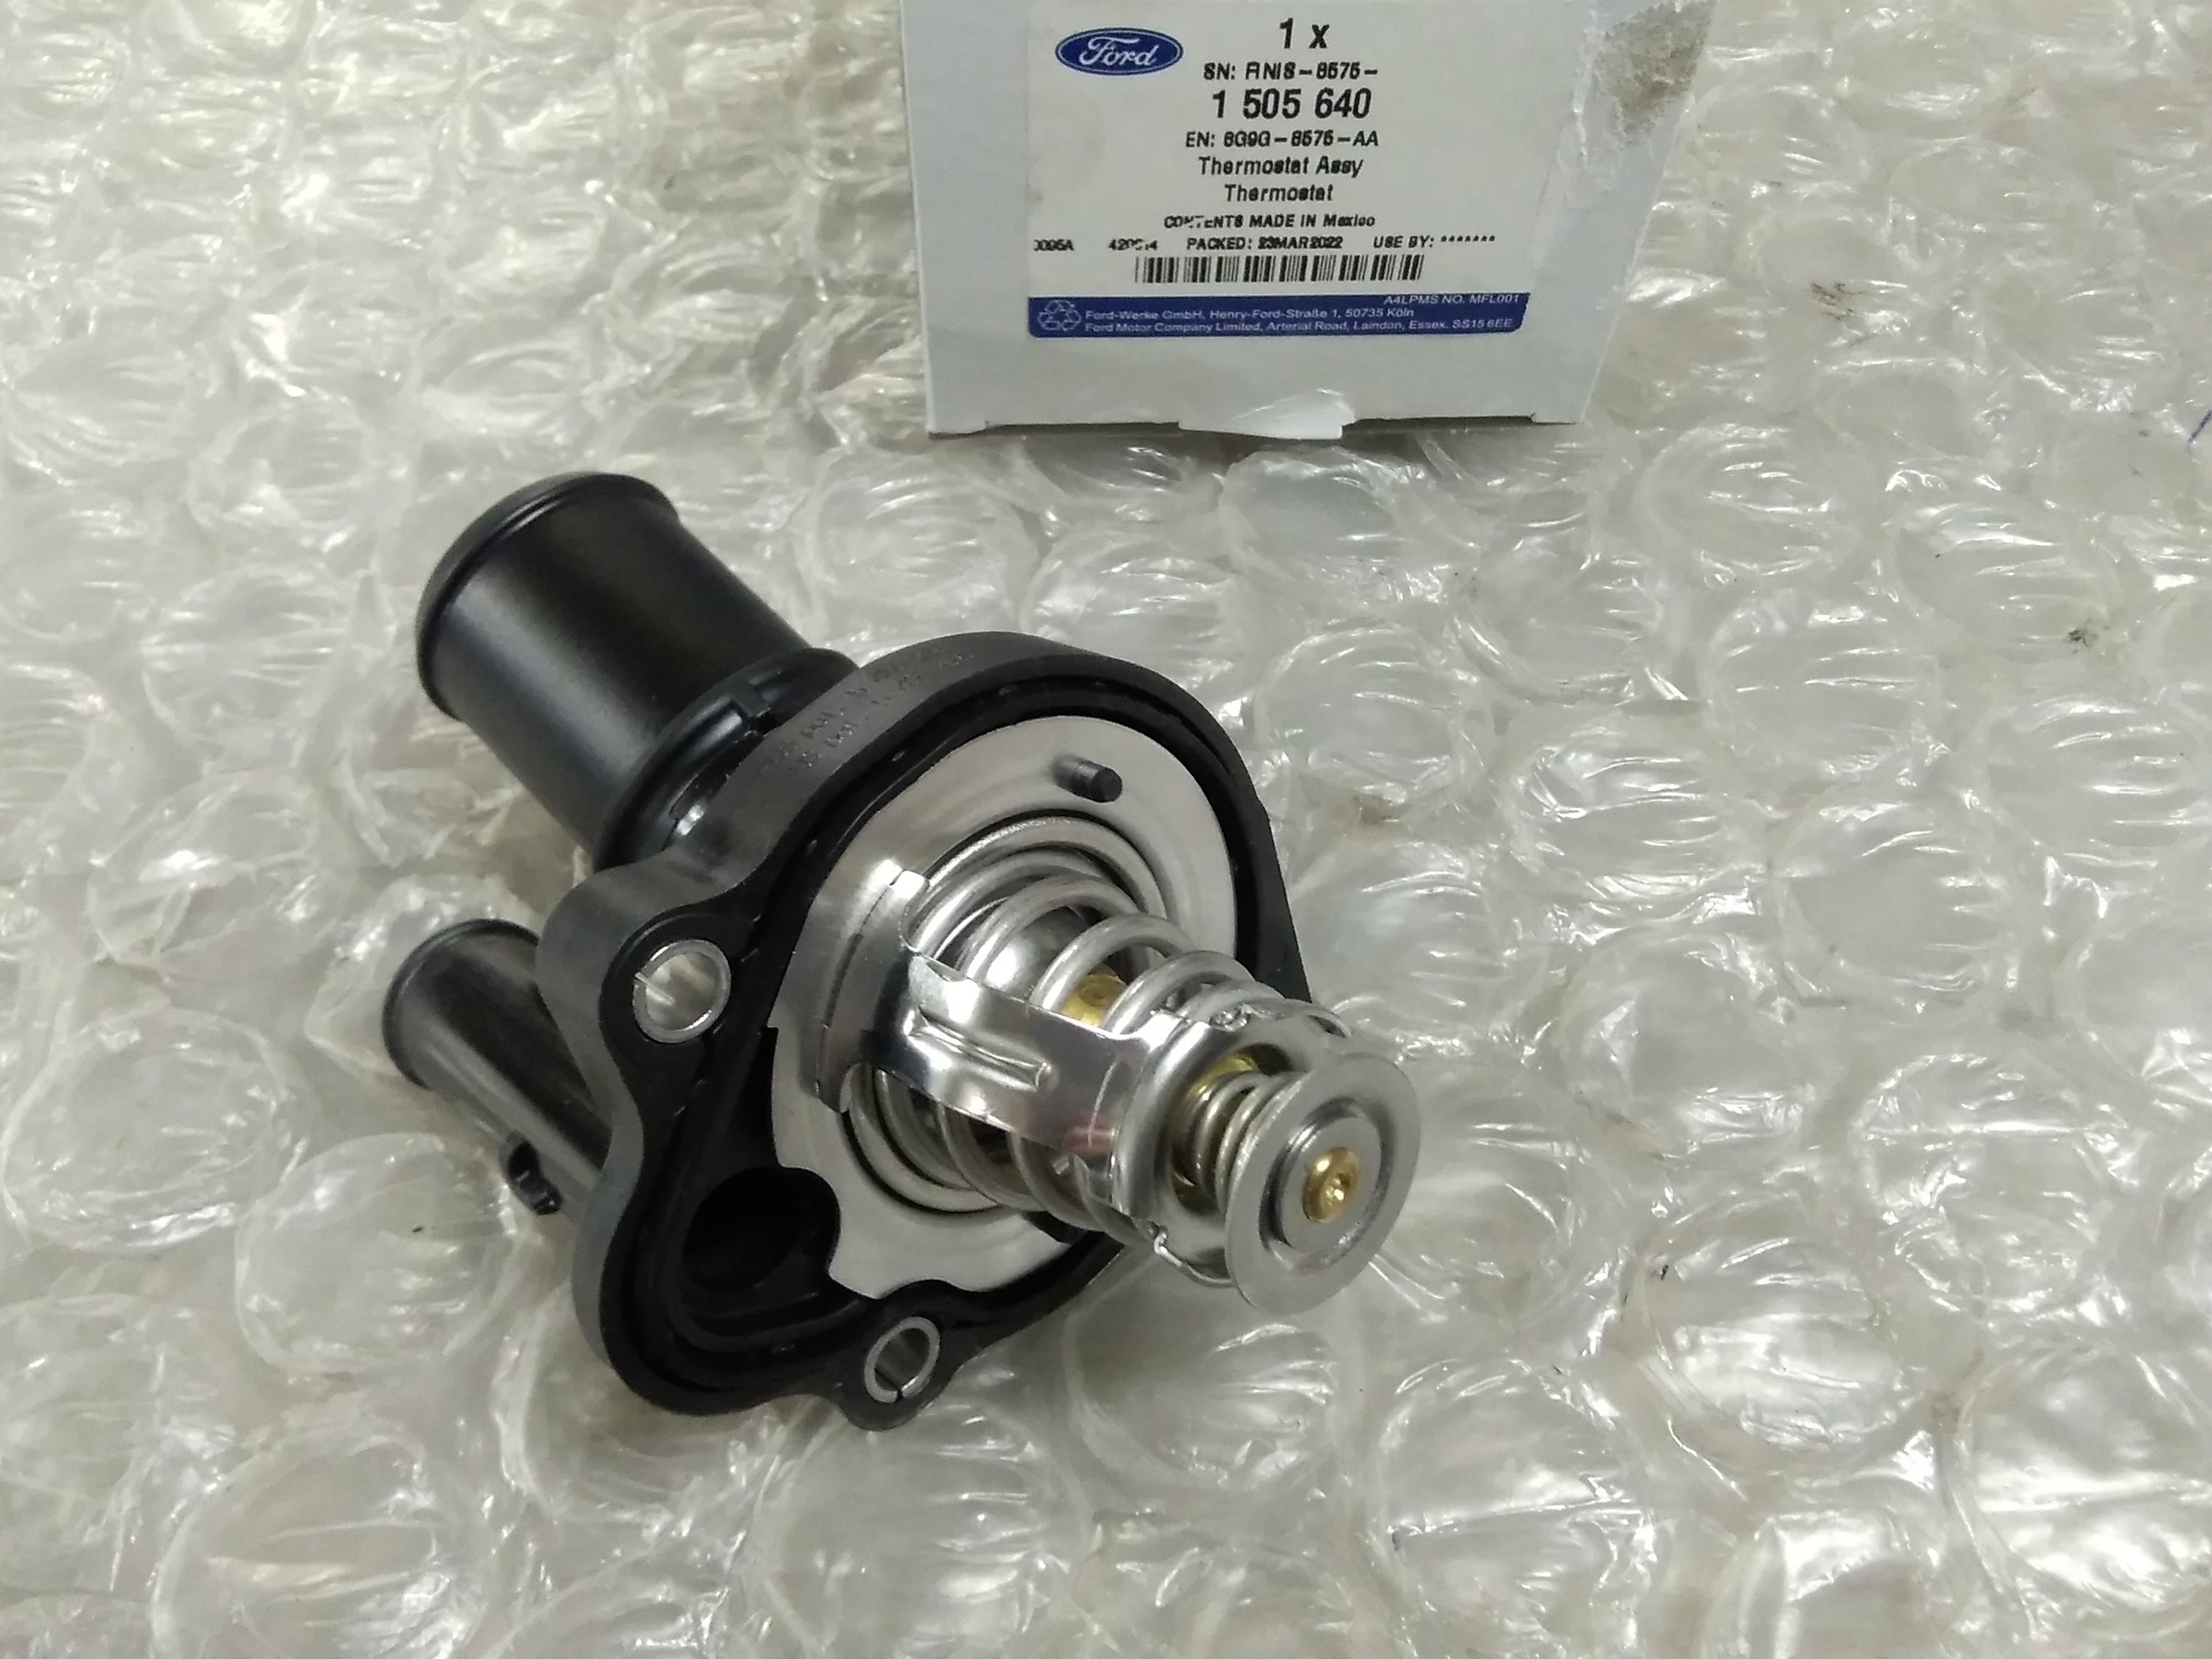 1505640-Ford Original Thermostat Ford Galaxy 2.3 Ltr. Benziner 2007-2010 - 8G9G 8575 AA